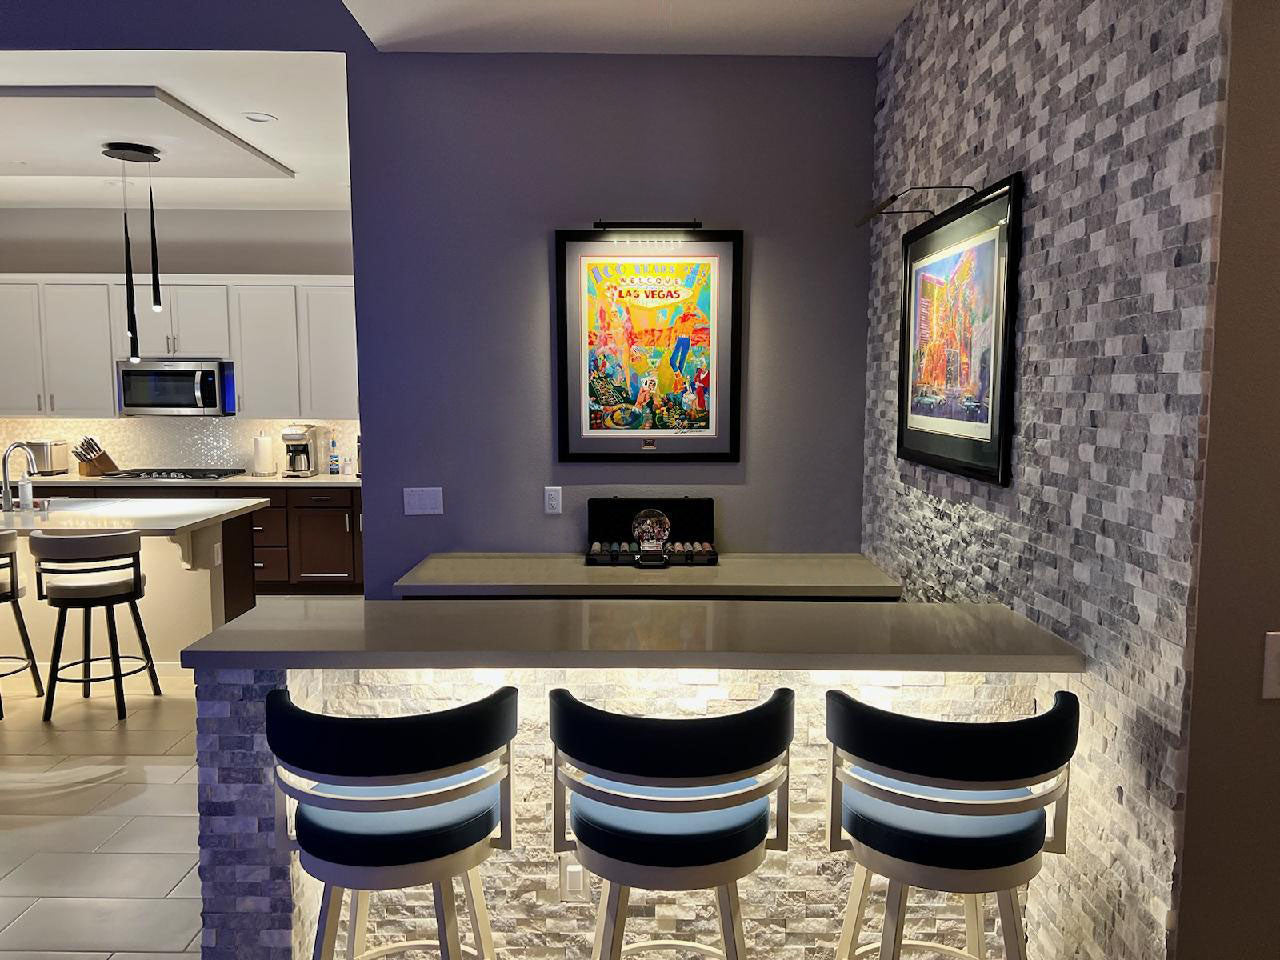 Modern kitchen bar area highlighted by well-lit vibrant artwork with specialized art lighting fixtures enhancing visual appeal.